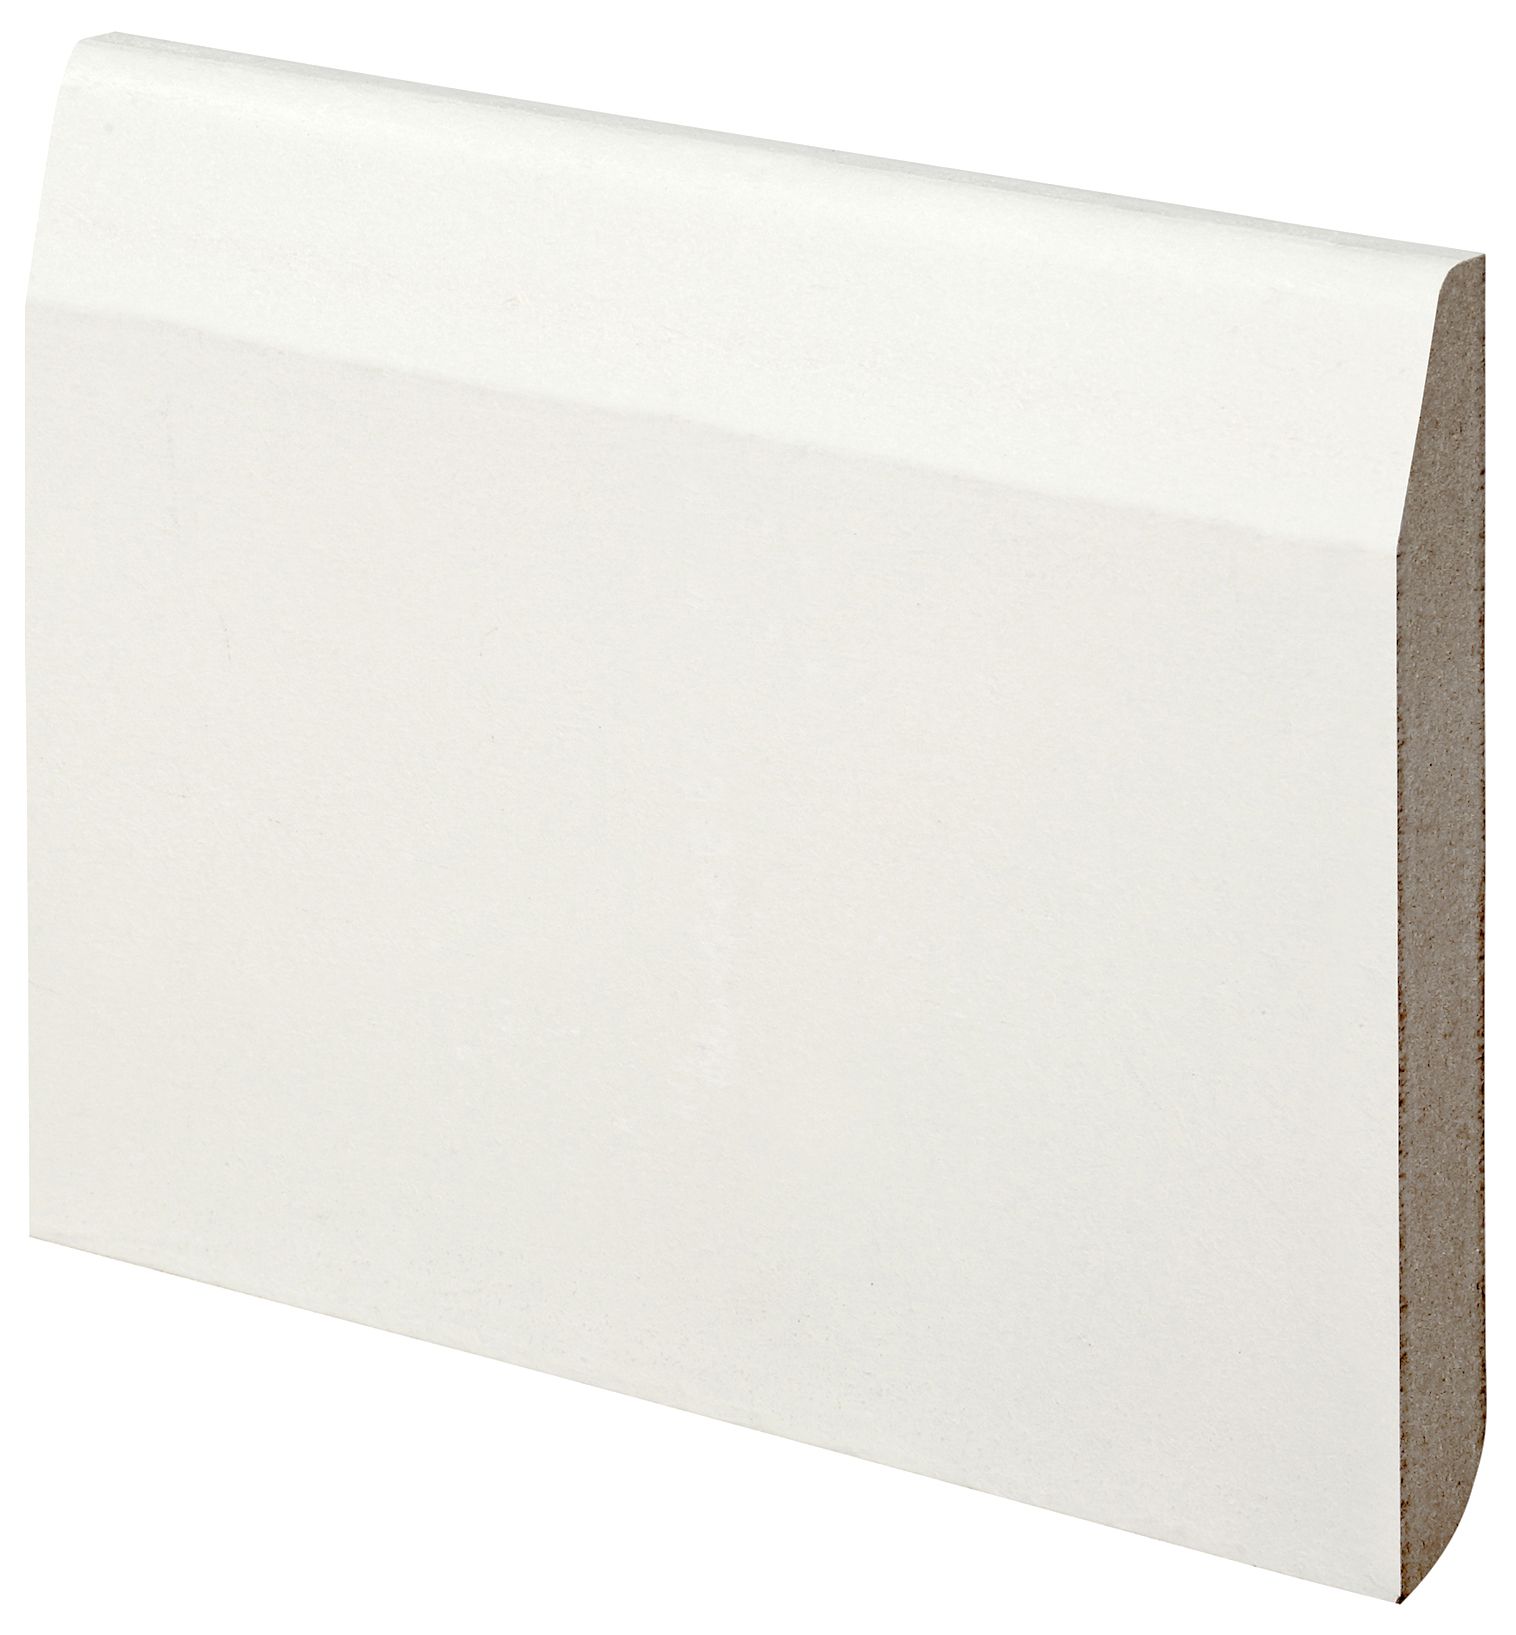 Image of Wickes Dual Purpose Chamfered/Bullnose Primed MDF Skirting - 18 x 169 x 3660mm - Pack of 2